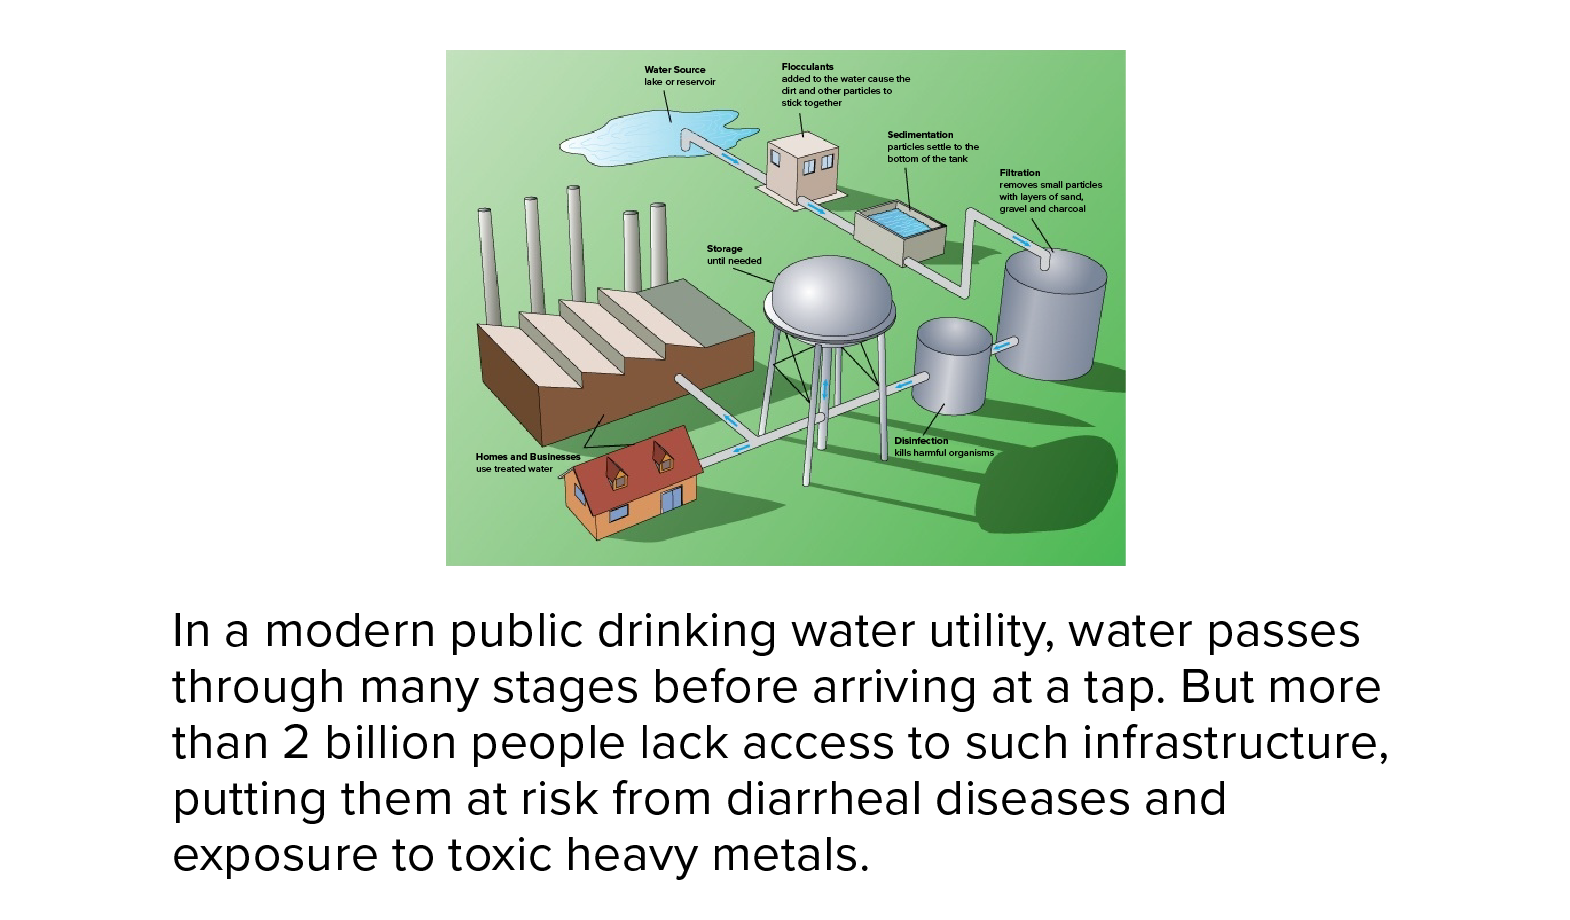 An illustration that shows how, in a modern public drinking water utility, water passes through many stages before arriving at a tap. But more than 2 billion people lack access to such infrastructure, putting them at risk from diarrheal diseases and exposure to toxic heavy metals.